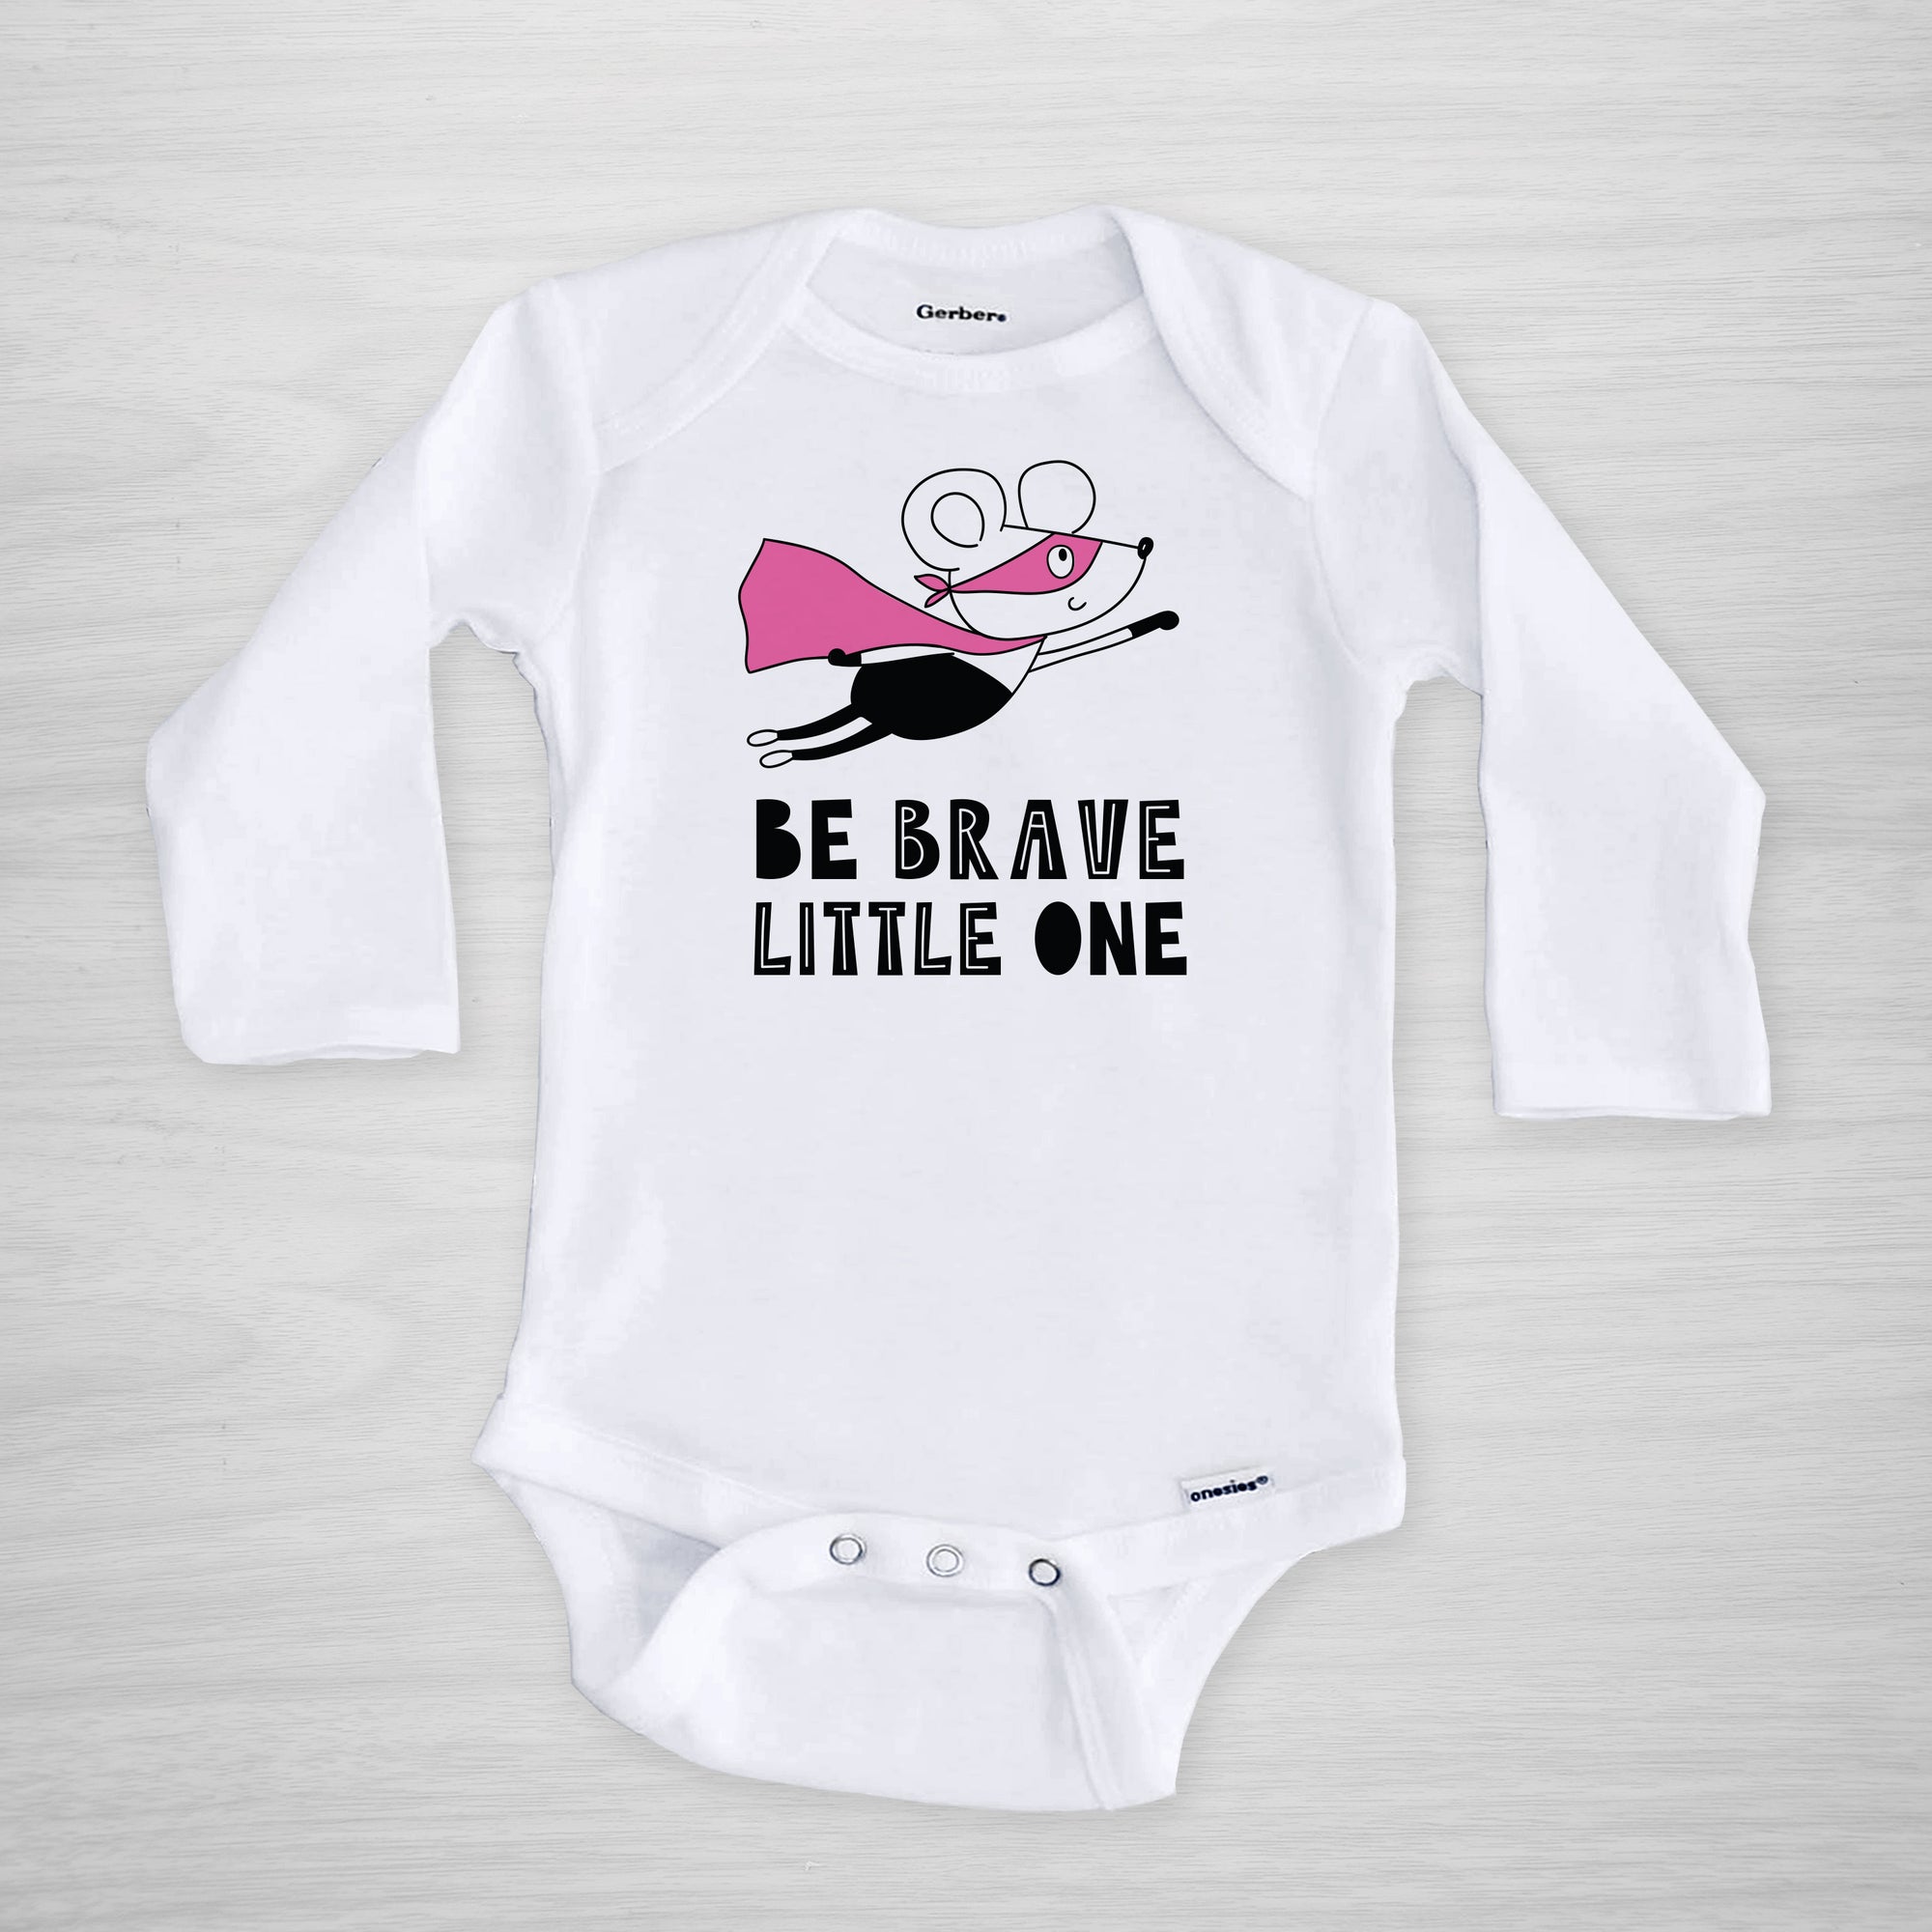 Be Brave Little One Onesie®, with a pink superhero mouse, show how brave your little NICU warrior is during her hospital stay, long sleeved